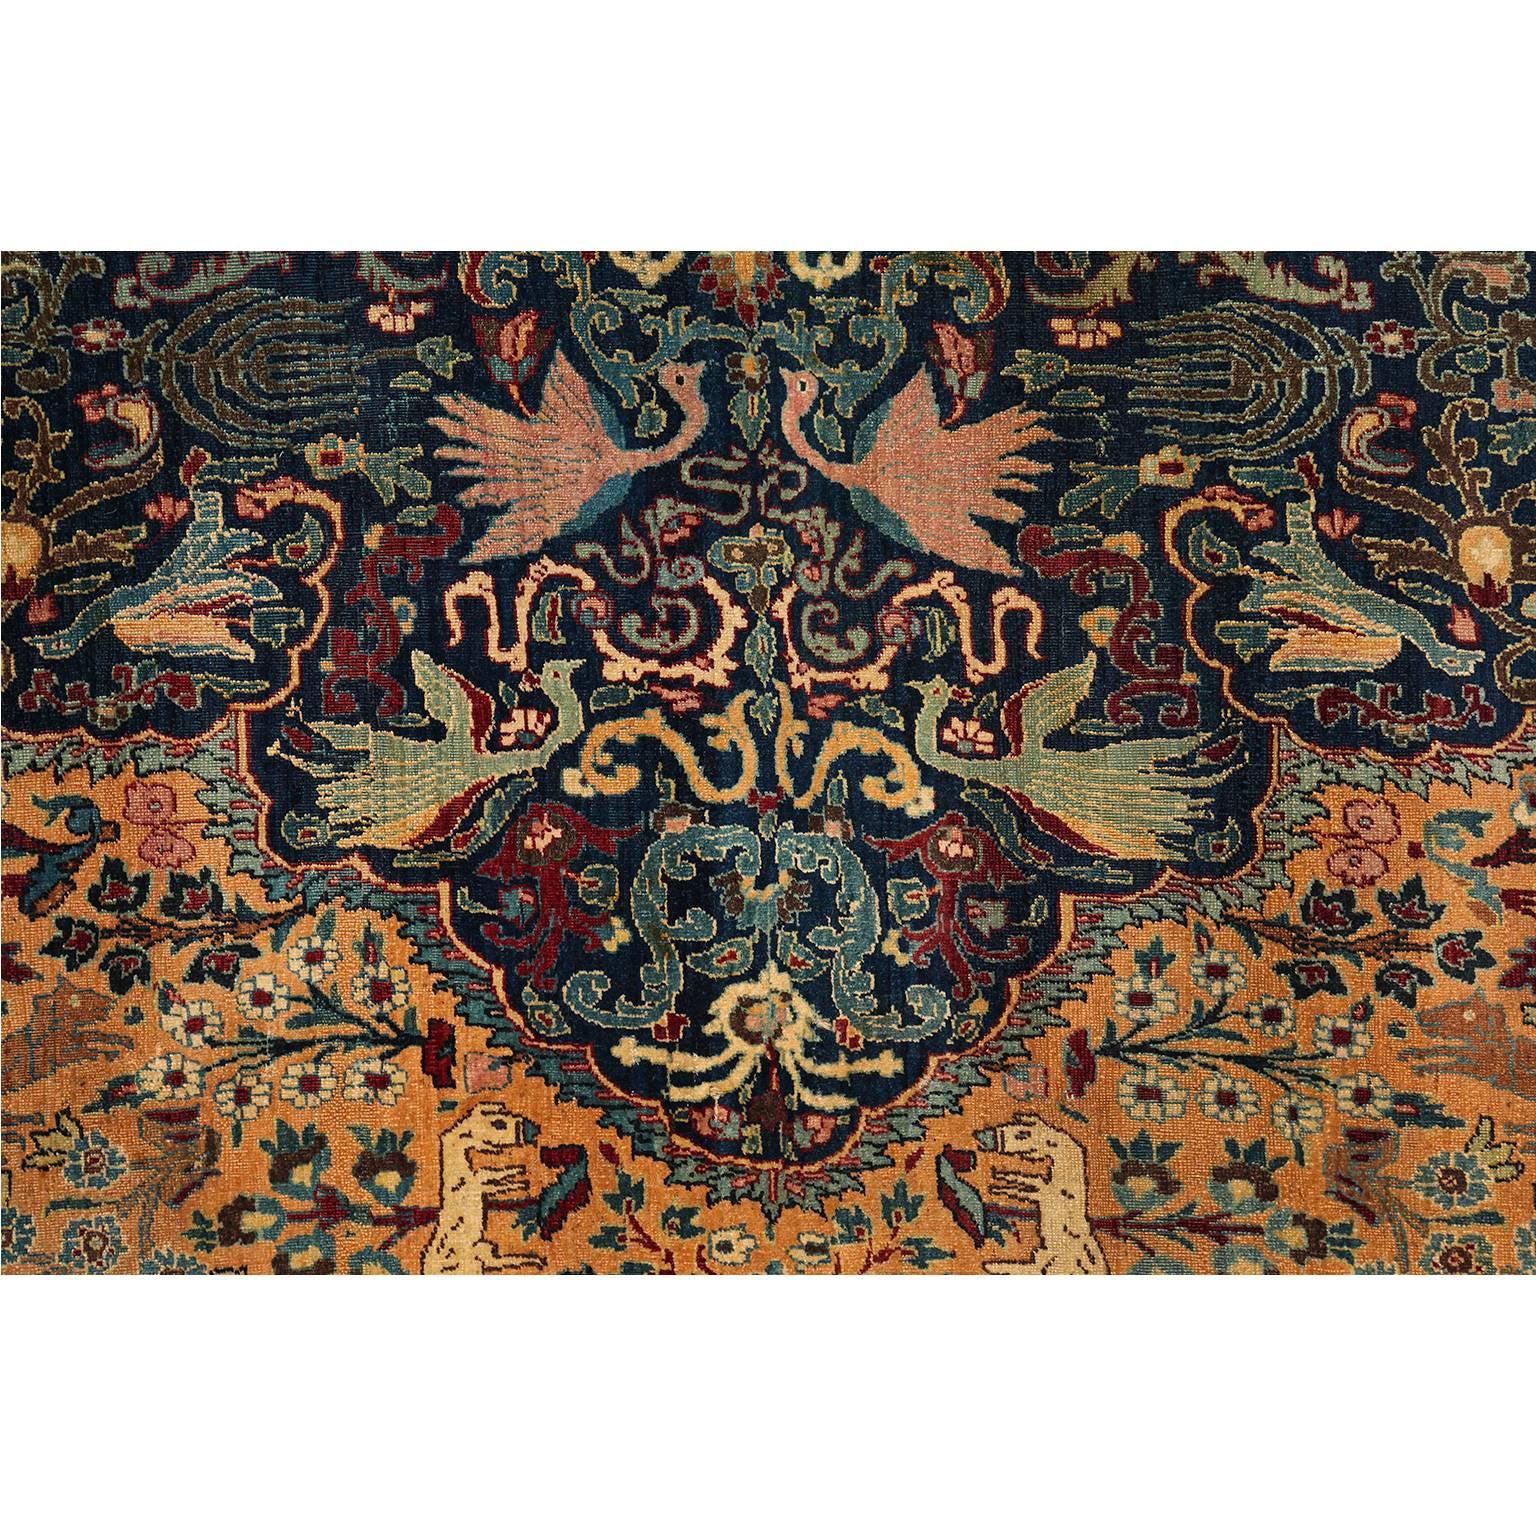 This Persian Tabriz carpet was woven by the order of Prince Shahrukh Mirza circa 1870, as stated by the signature in the carpet's border. It consists of a cotton warp and thread, hand-knotted pure wool pile and natural vegetable dyes. The level of